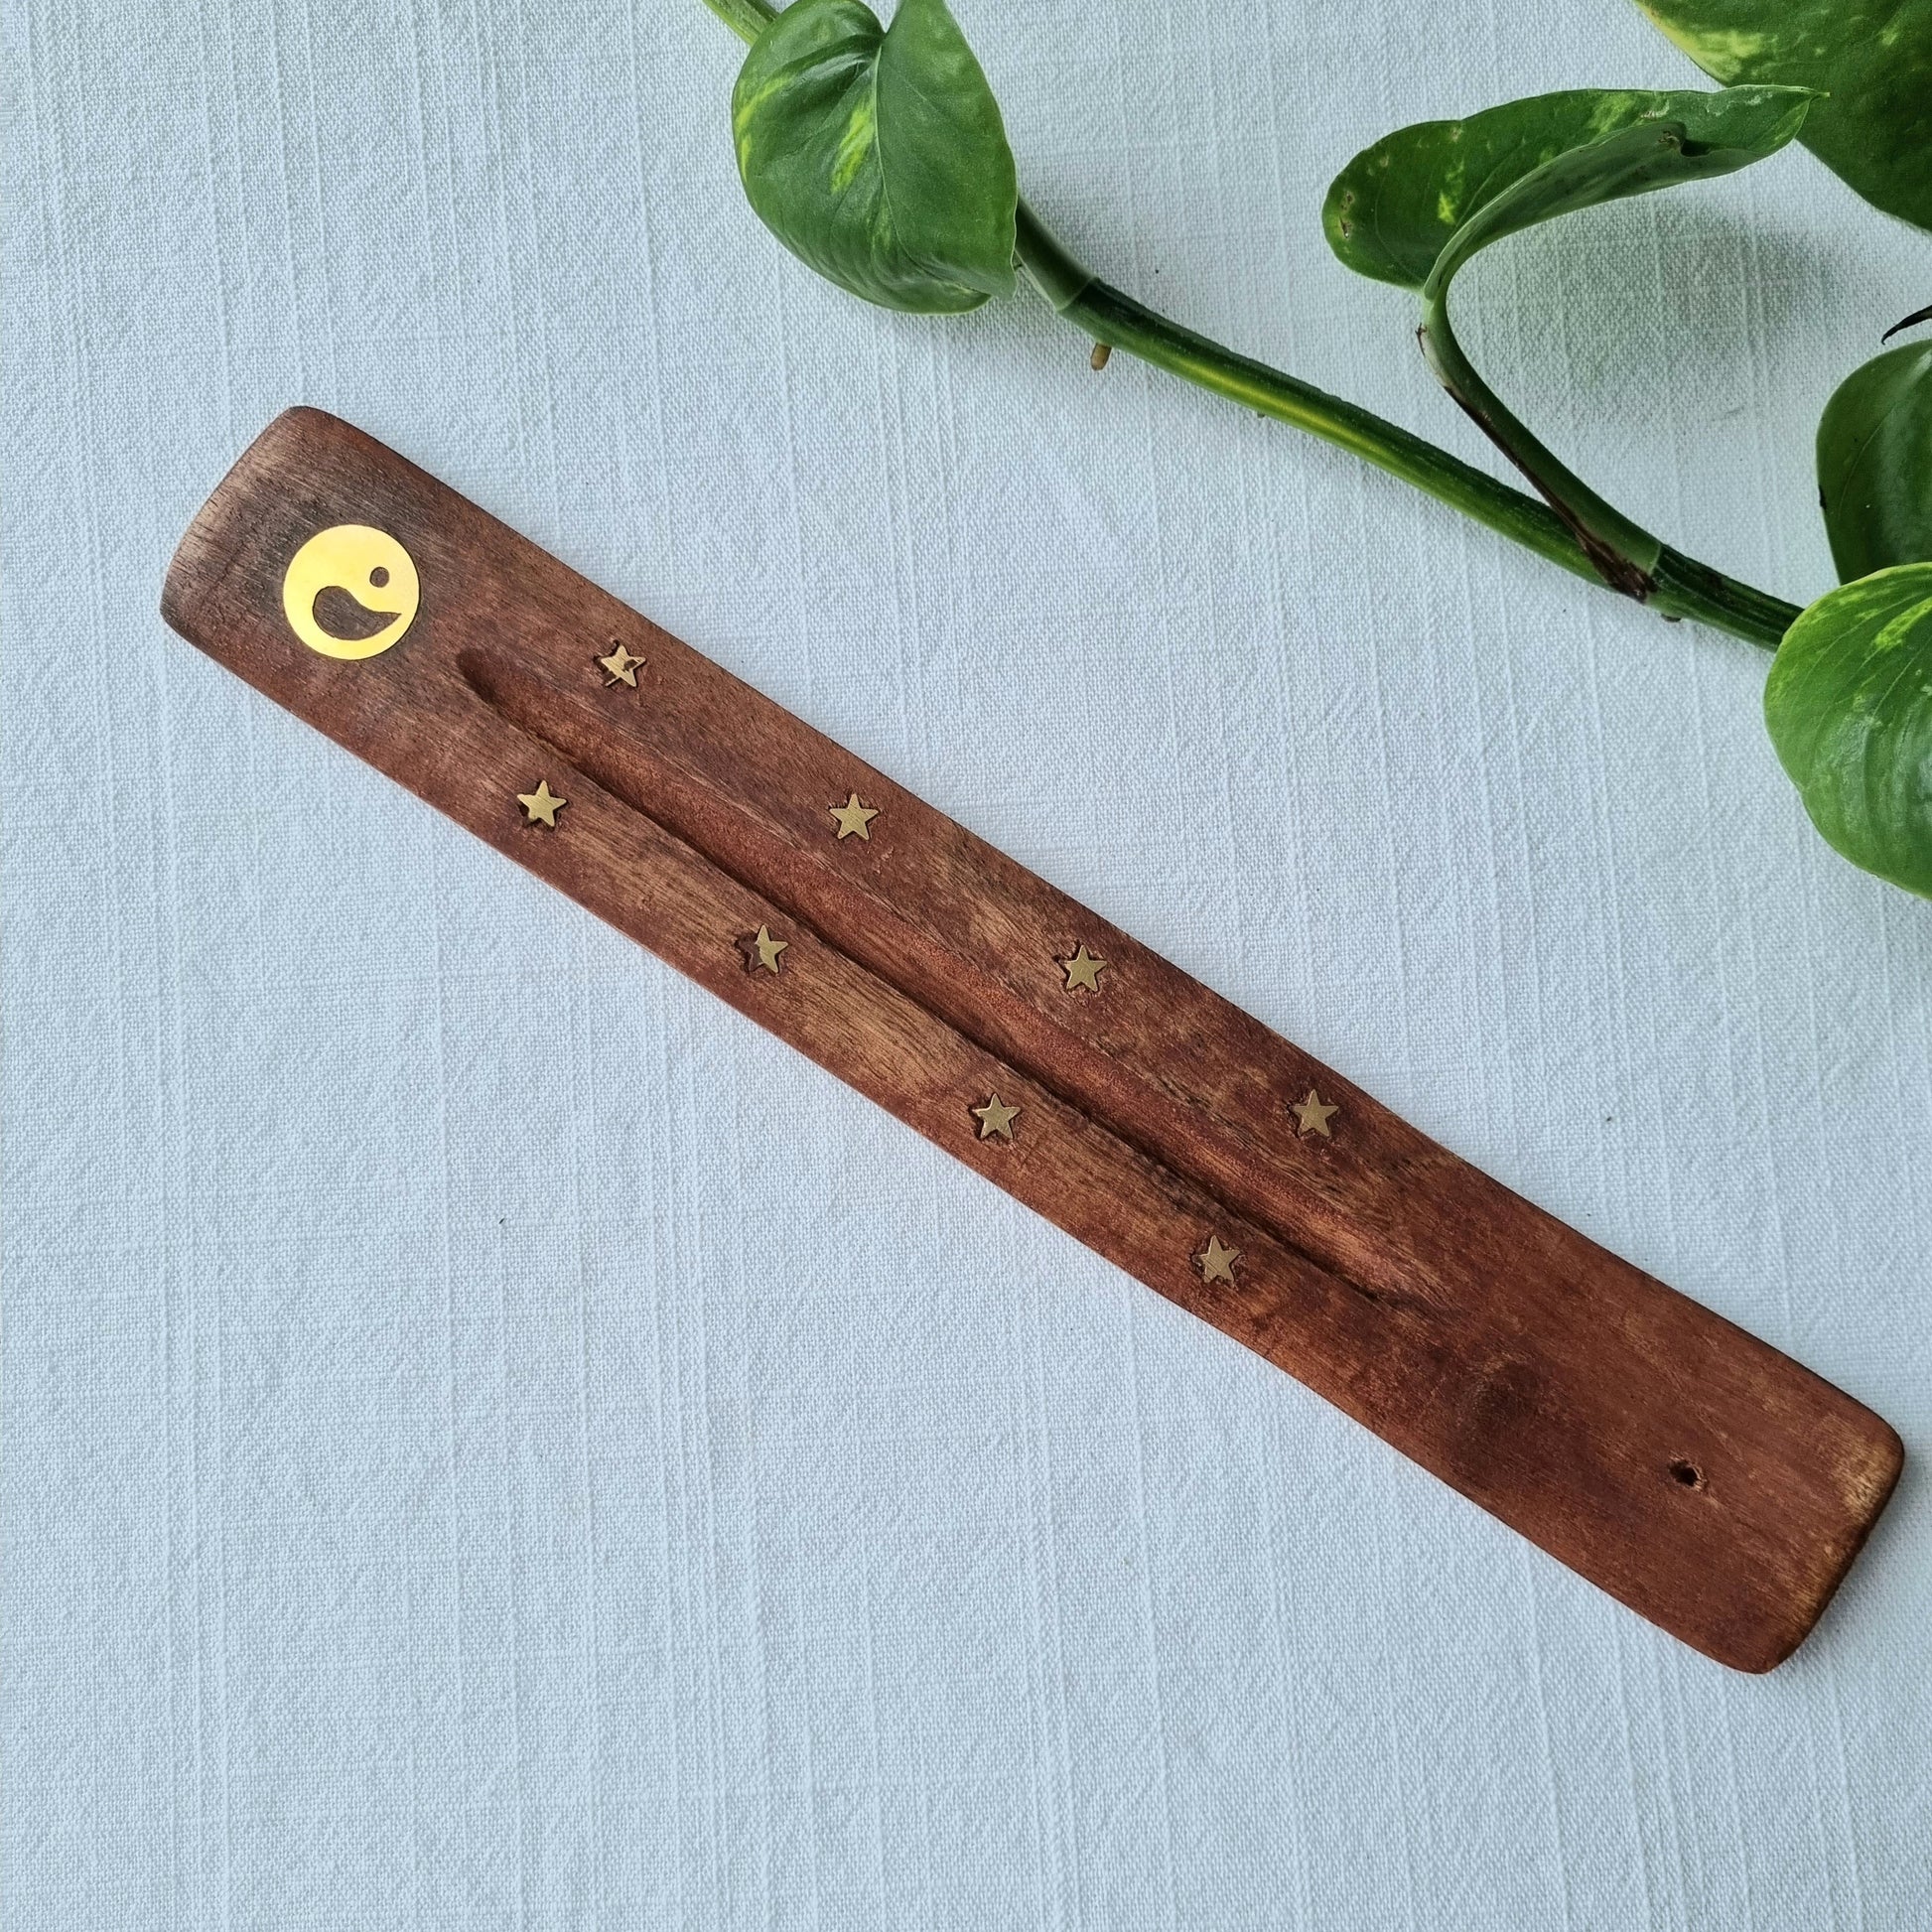 Incense holder/ash catcher - wooden with brass inlay design - Sparrow and Fox